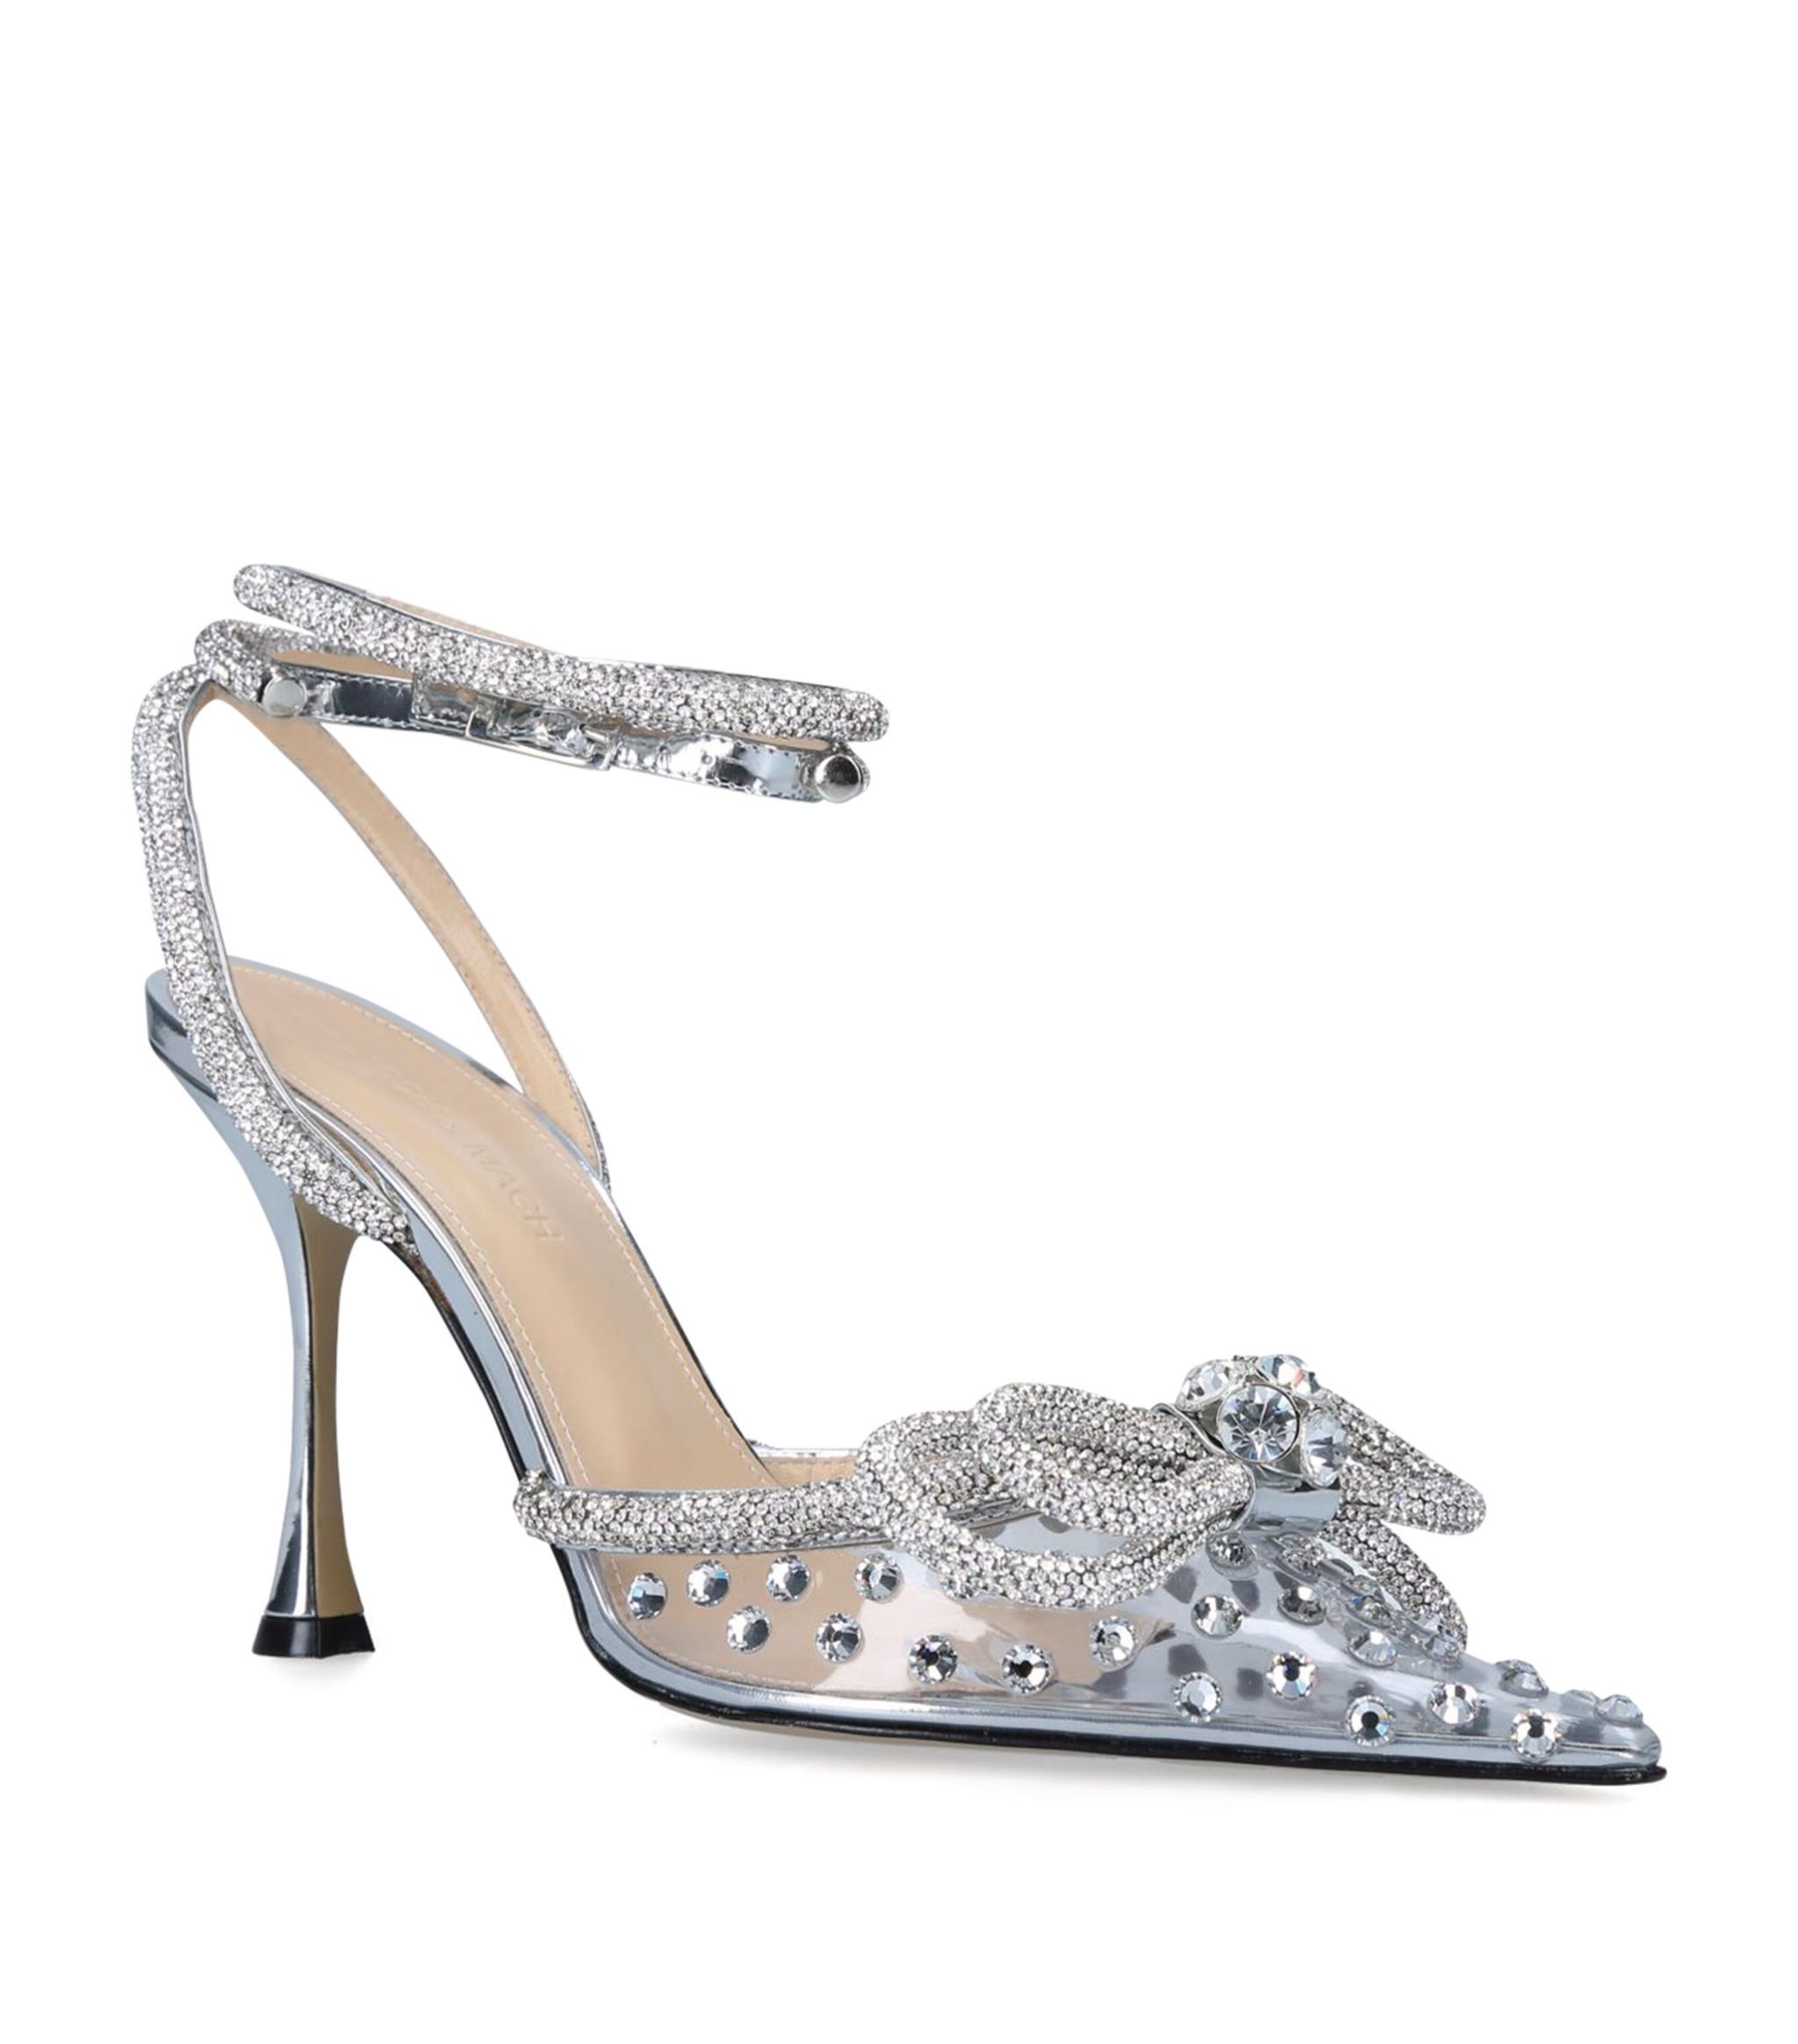 Crystal Double-Bow Pumps 100 | Harrods